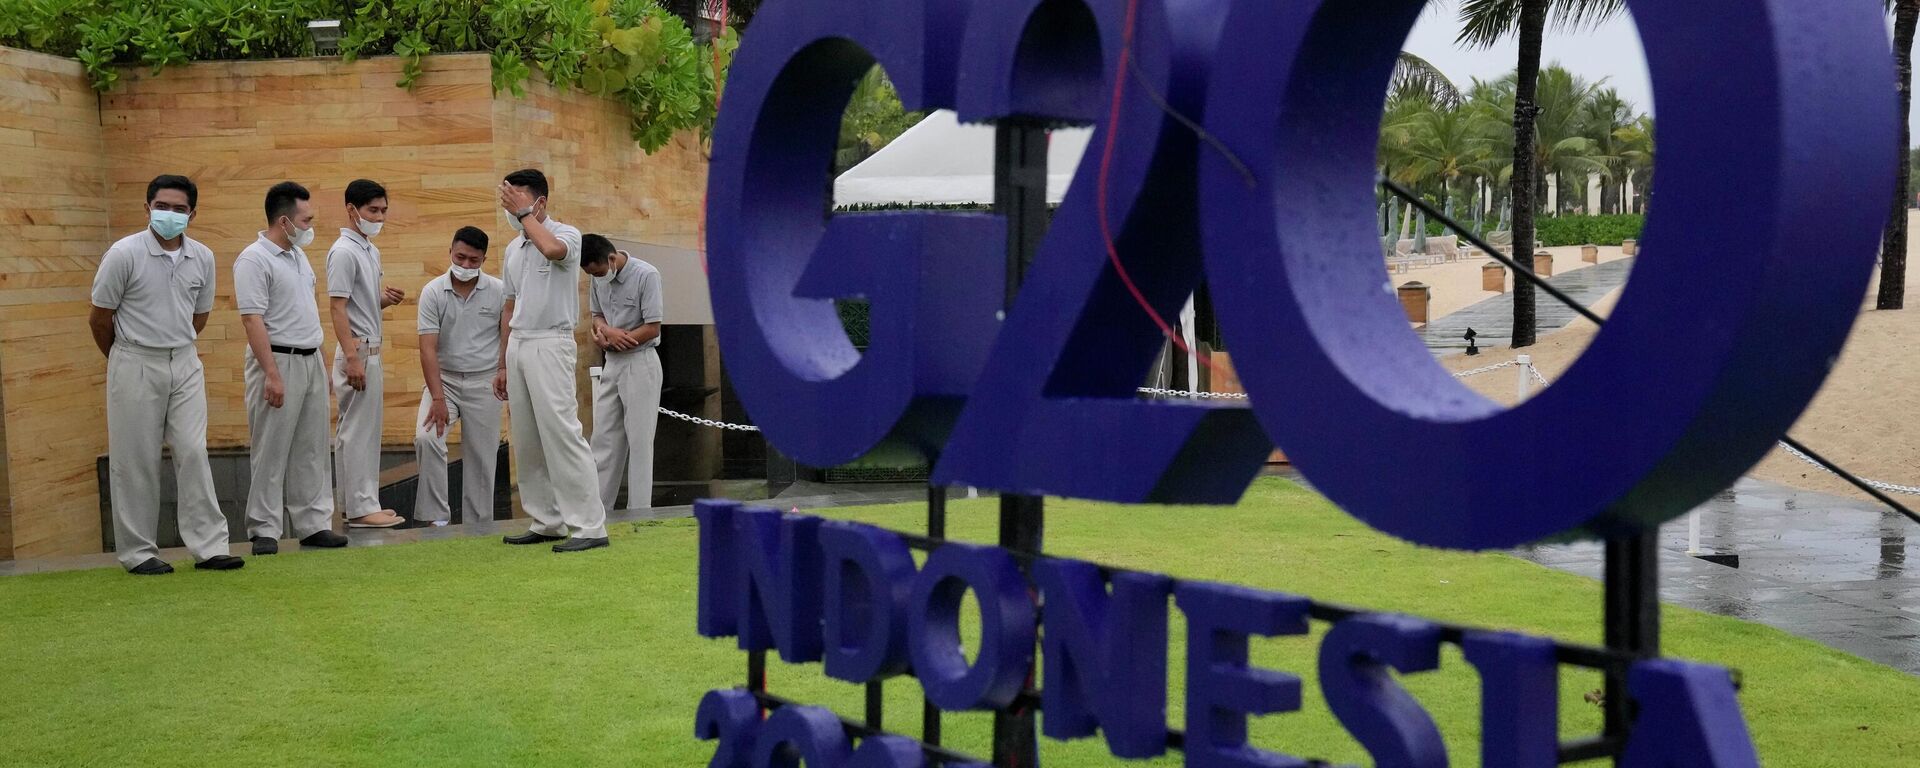 Hotel staff prepare a venue for a side event of the G20 Foreign Ministers' Meeting in Nusa Dua, Bali, Indonesia, Thursday, July 7, 2022 - Sputnik International, 1920, 08.07.2022